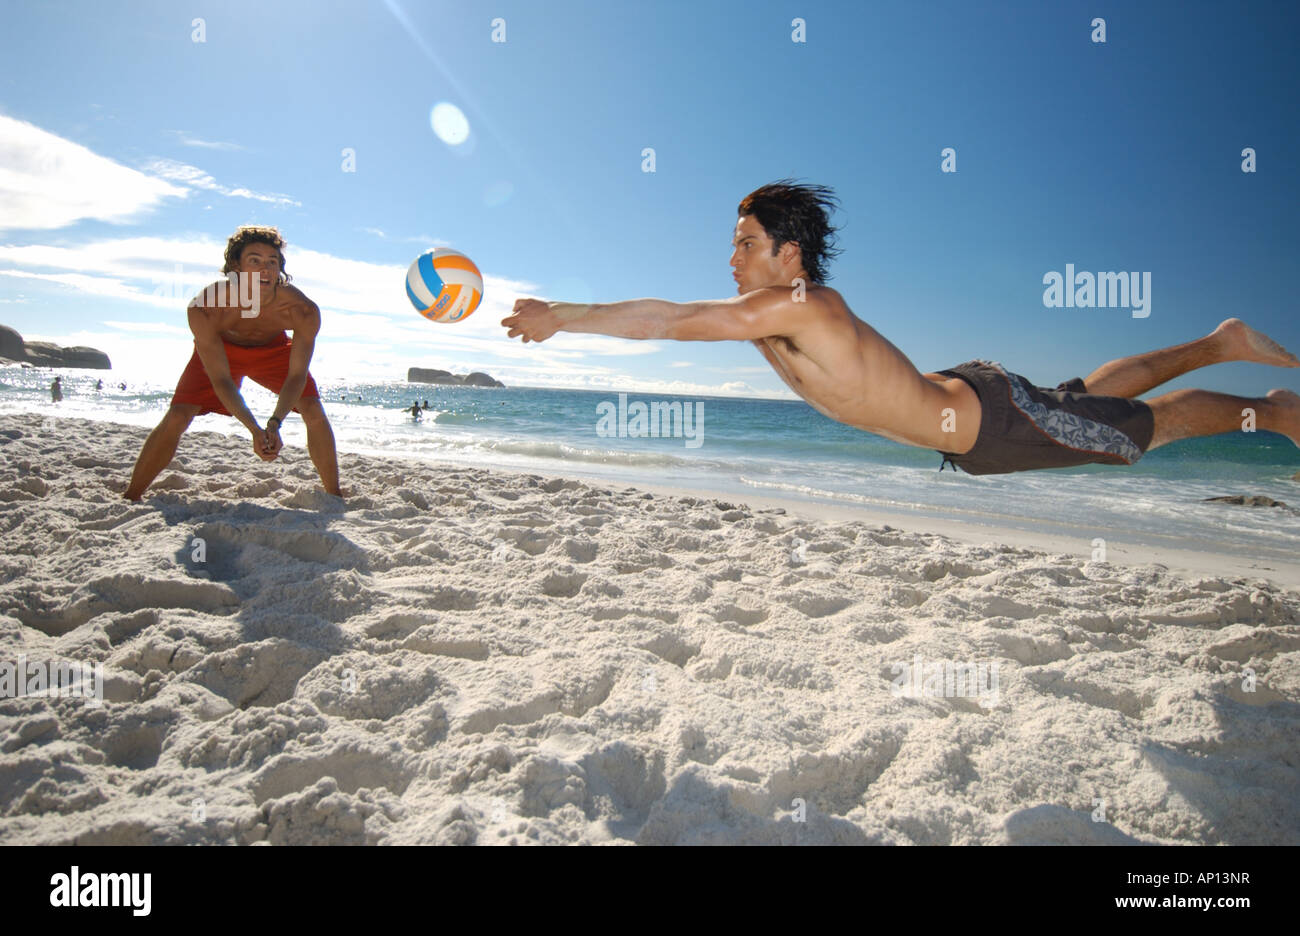 Beach volley, Clifton 4, Cape Town, Sud Africa Foto Stock